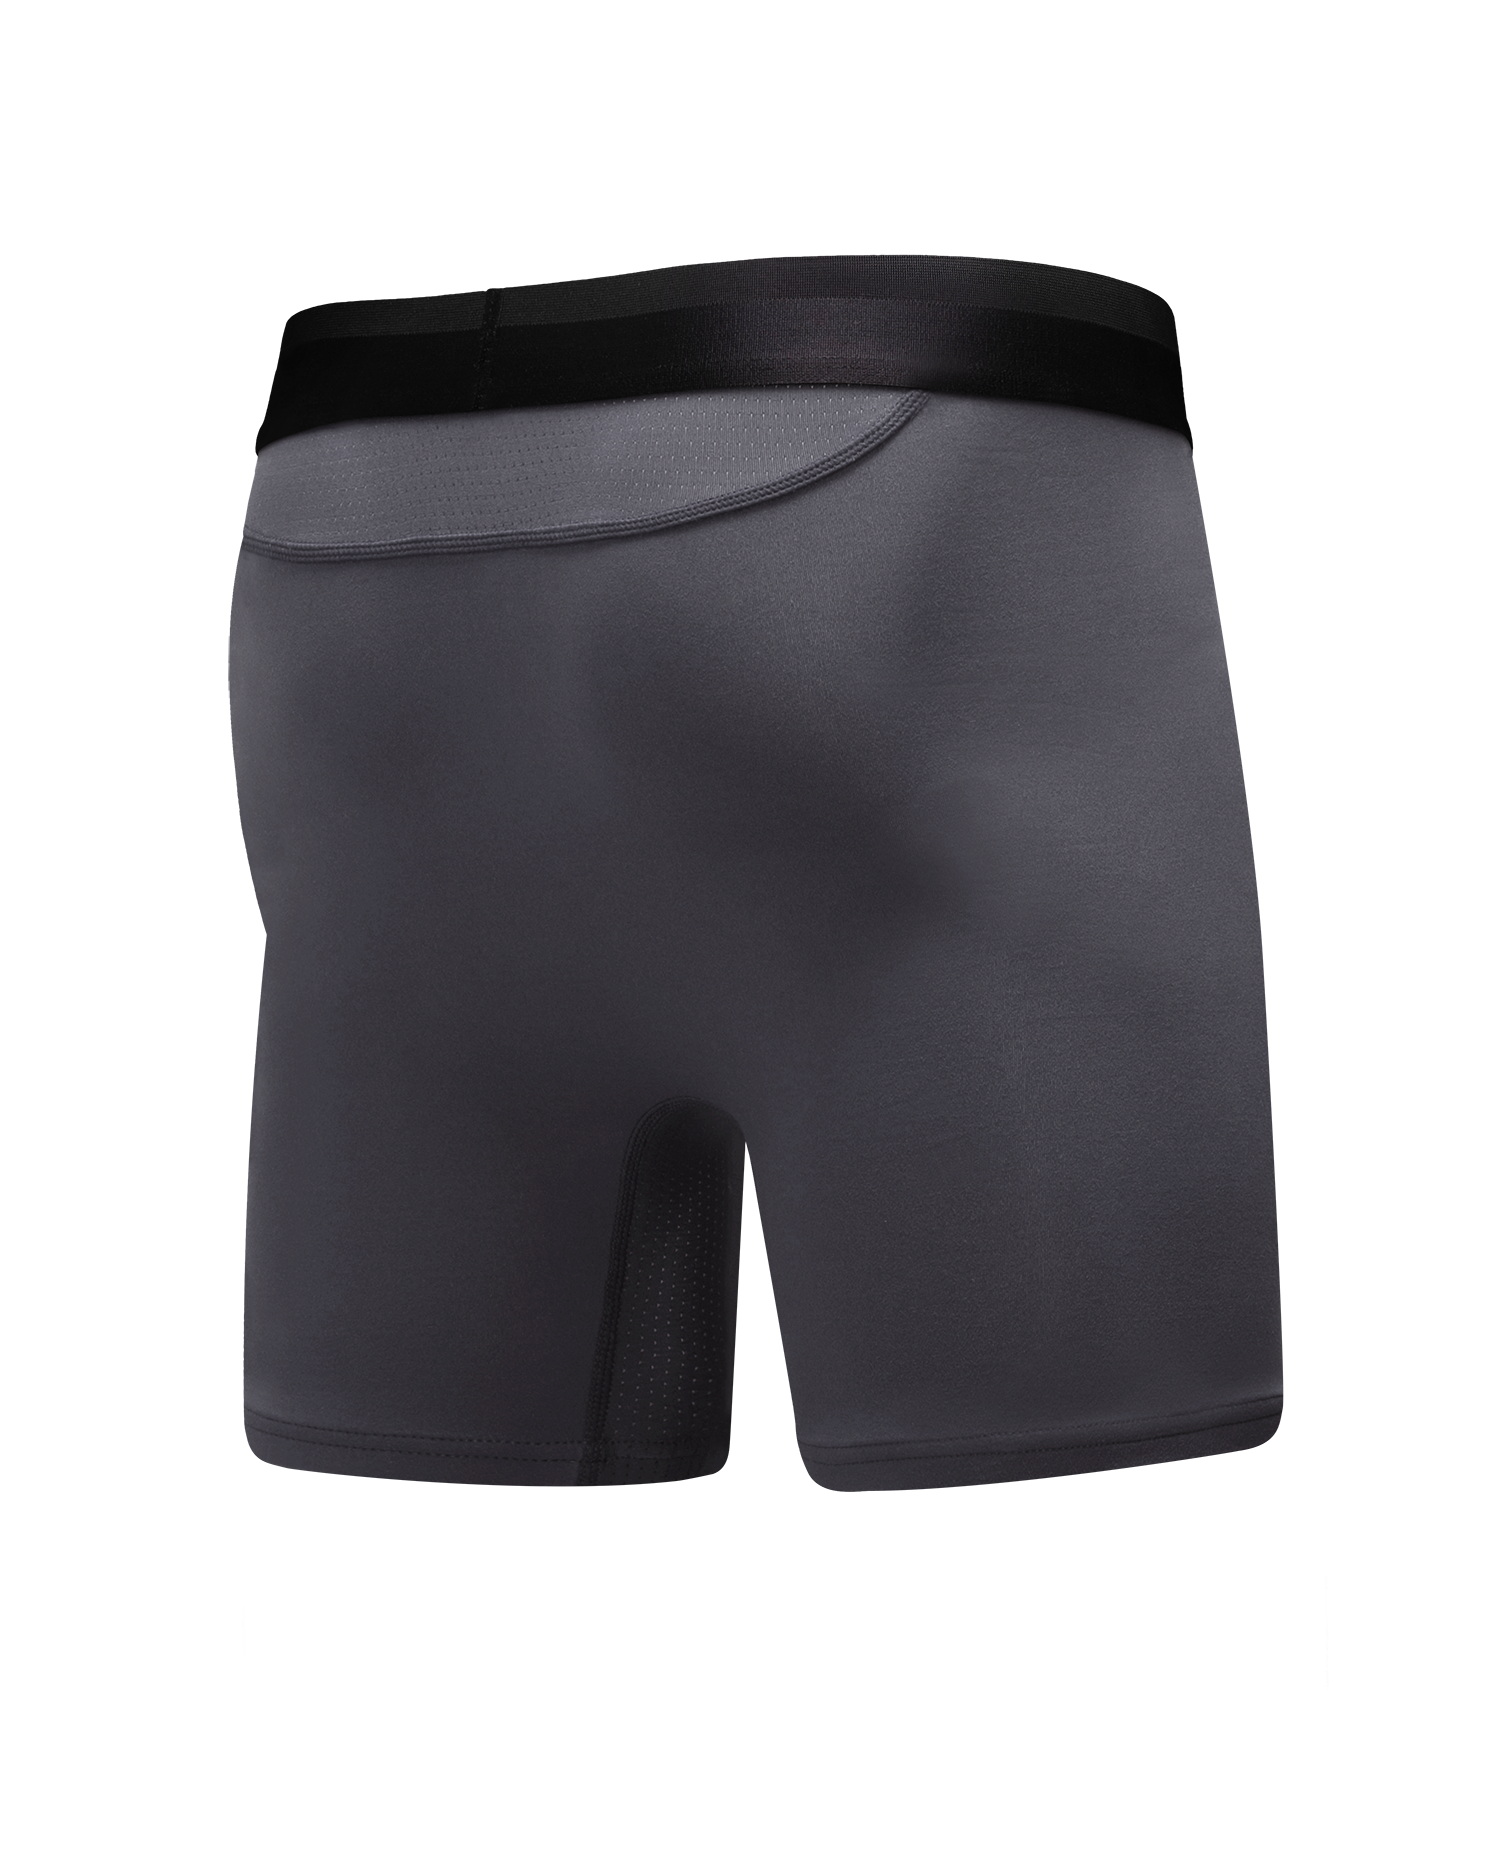 Restock: Re:Luxe Paradise Pocket Boxer Briefs are back in action